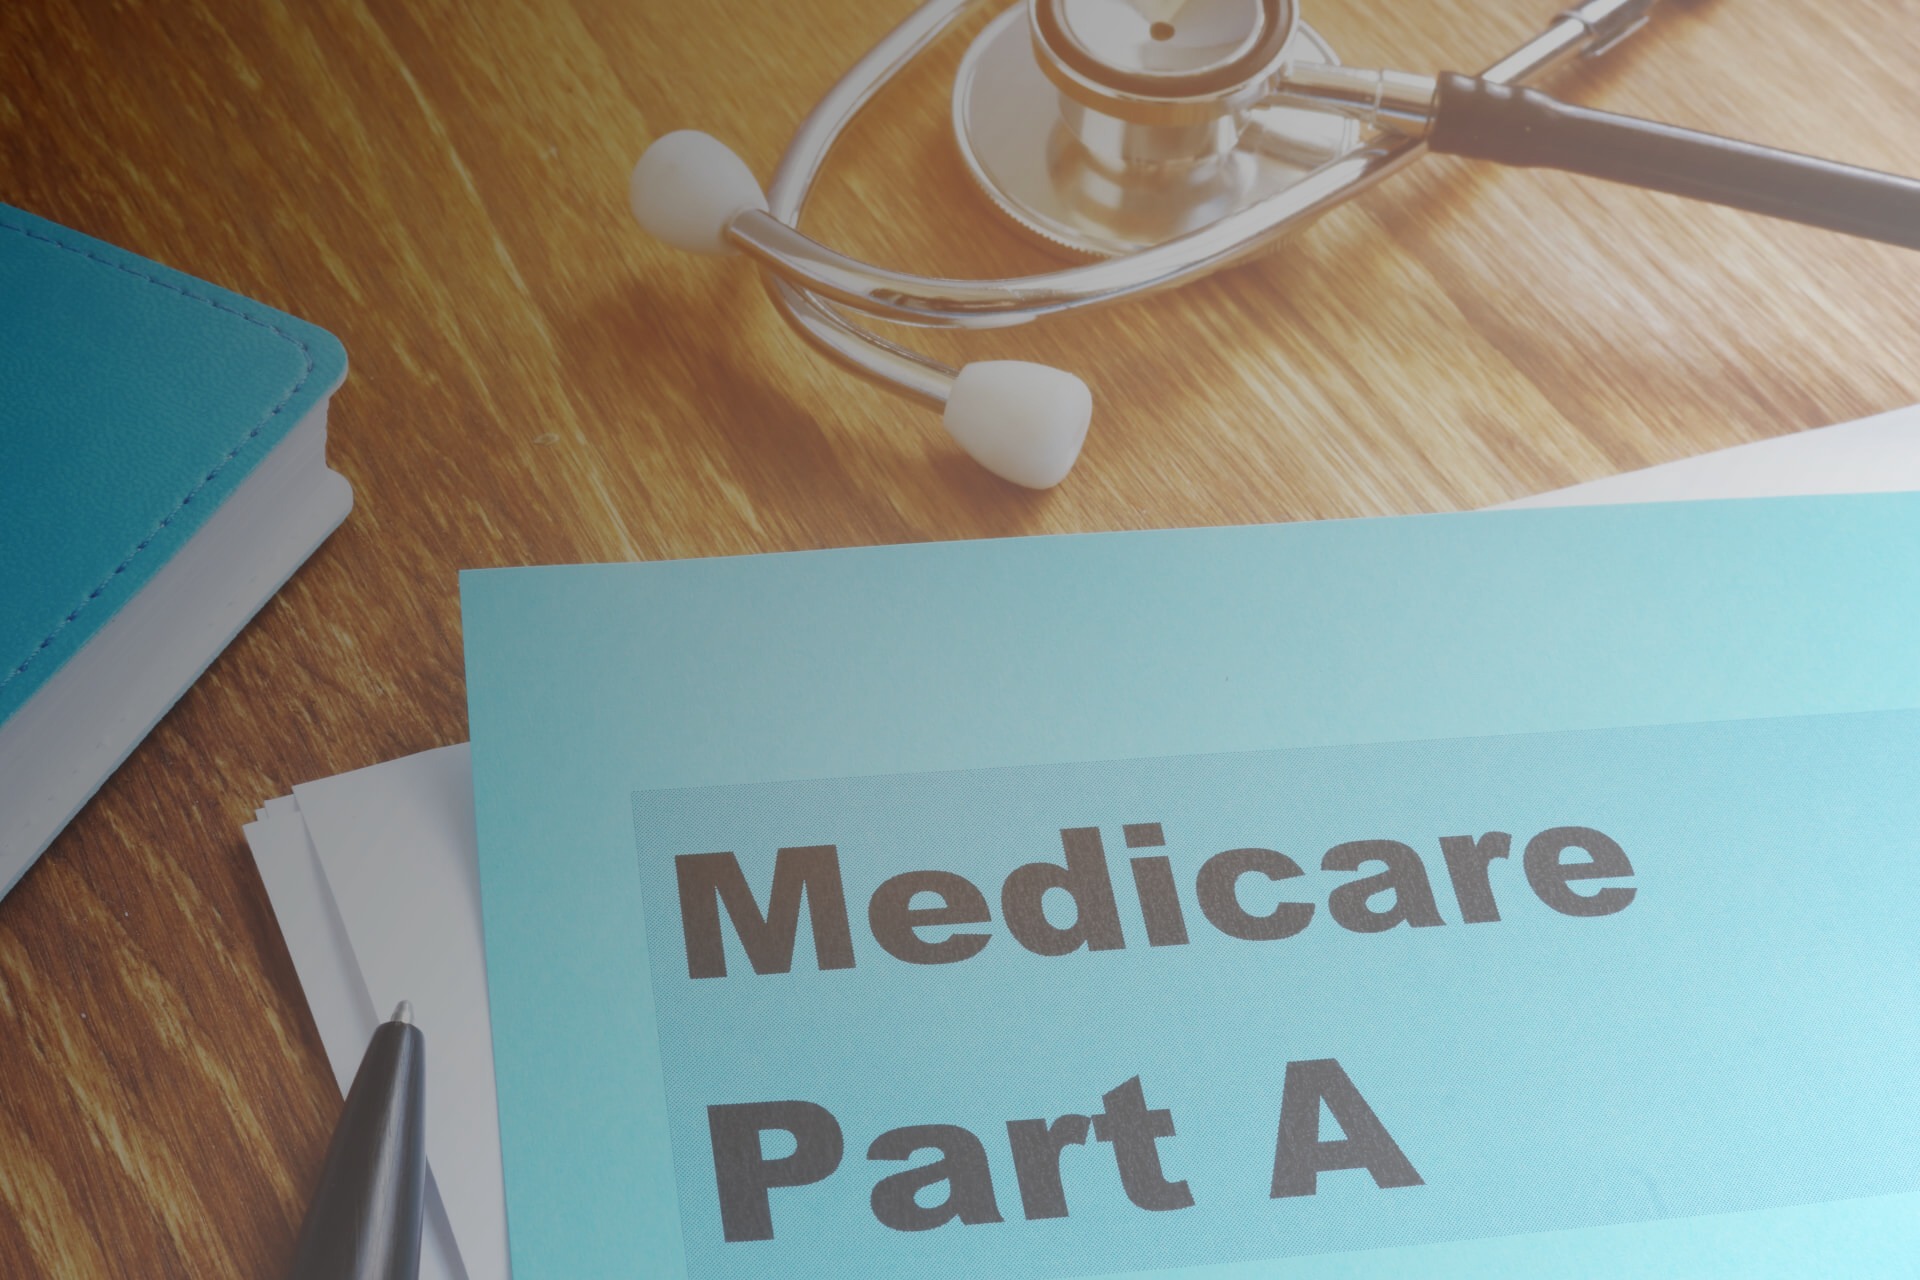 How Much Does Medicare Part A Cost in 2021?